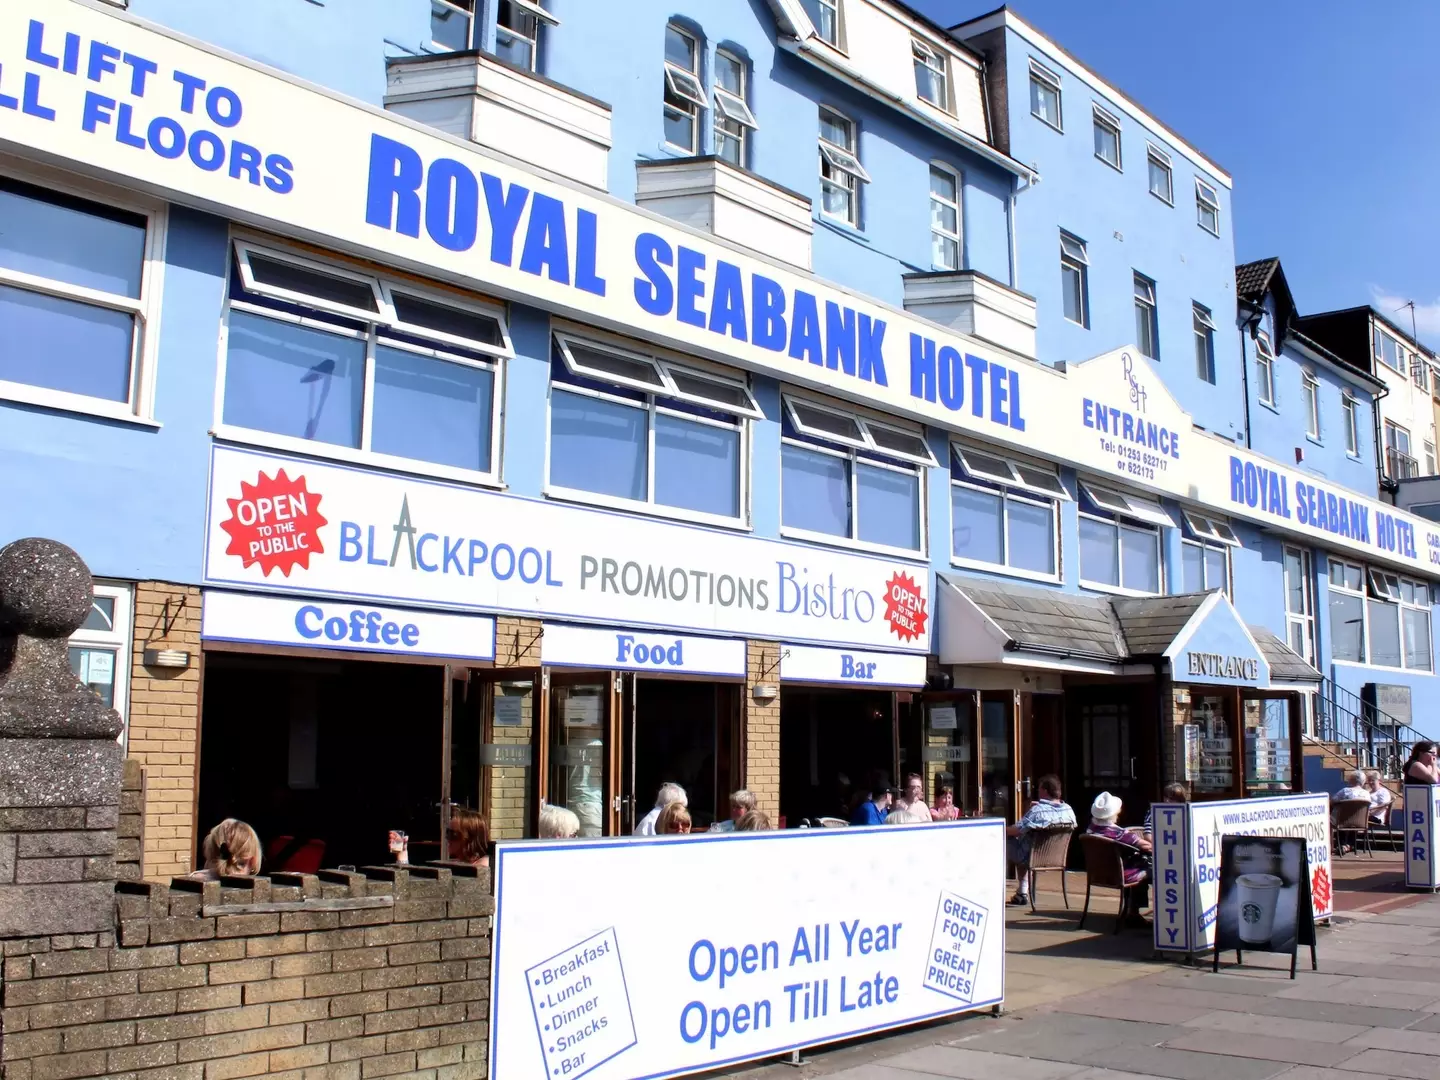 One customer complained about the smell at the Royal Seabank Hotel in Blackpool.